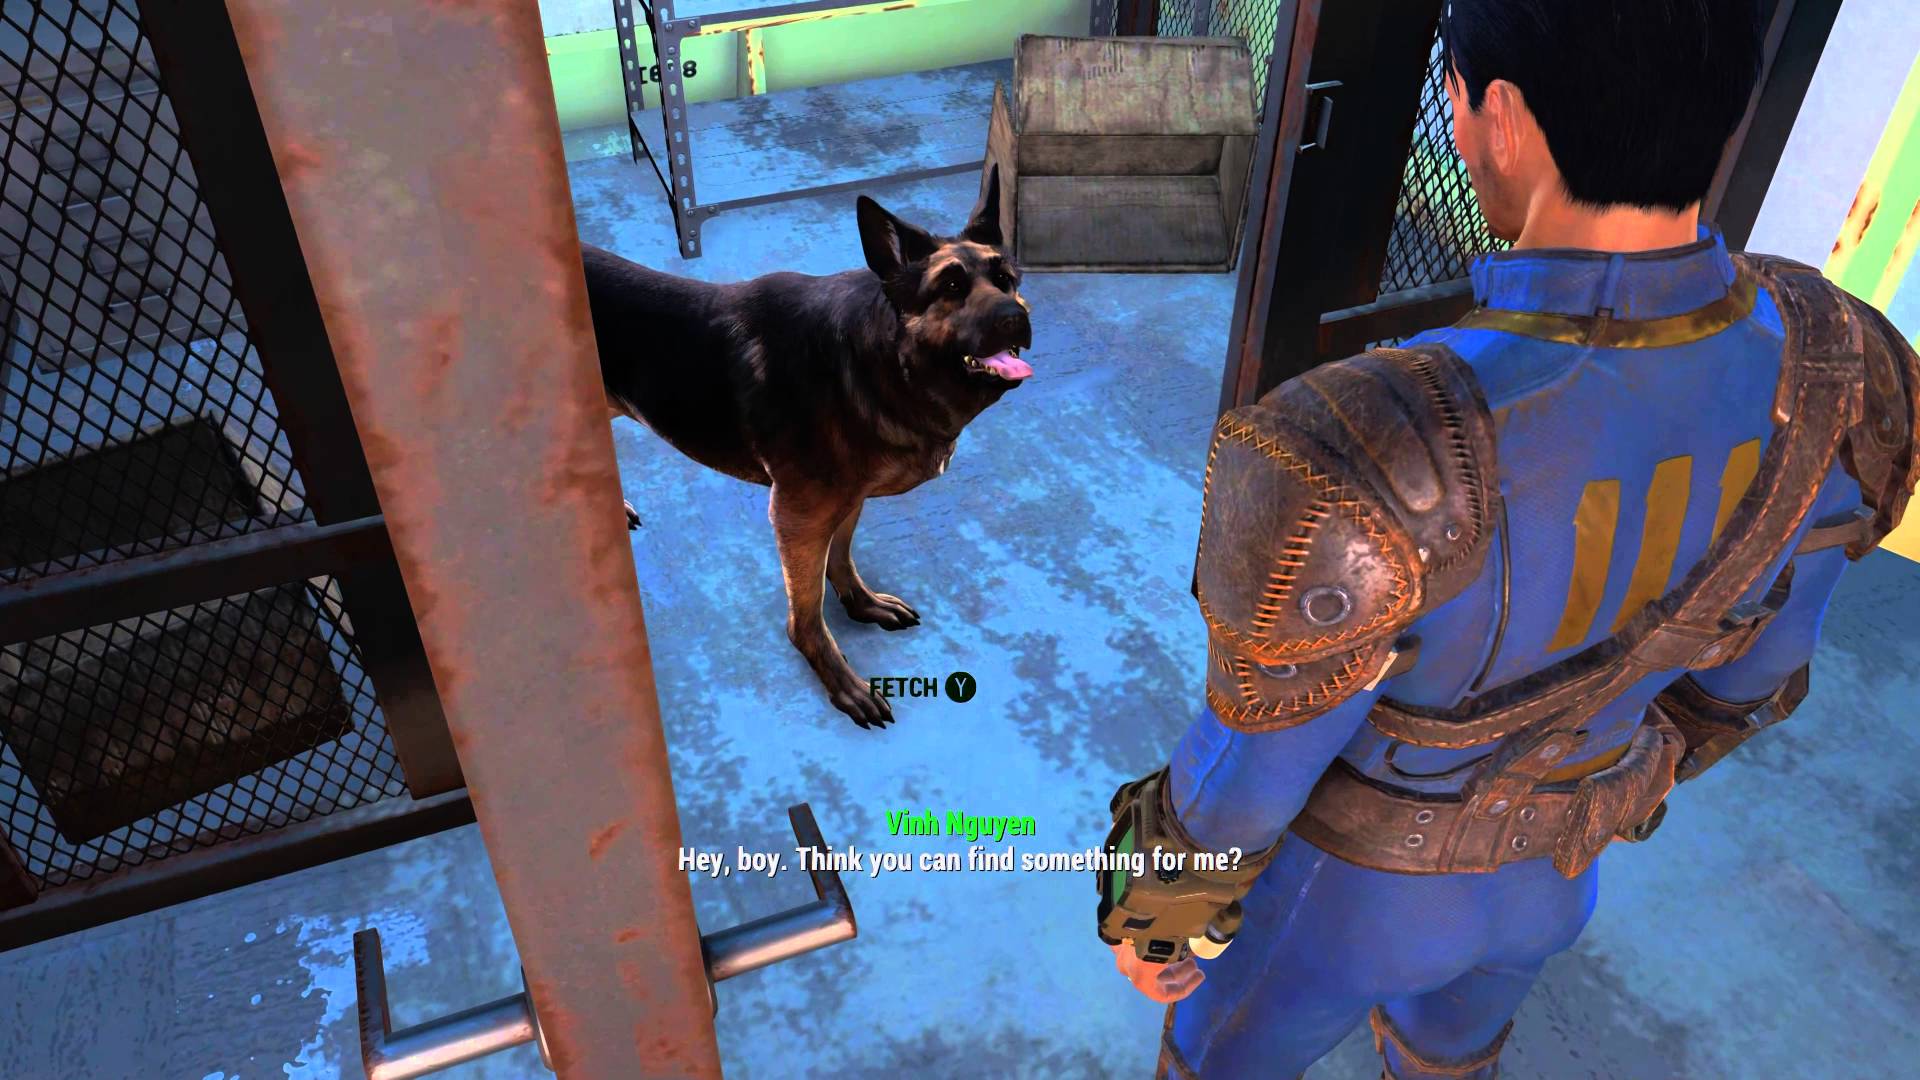 fallout 4 gameplay hd